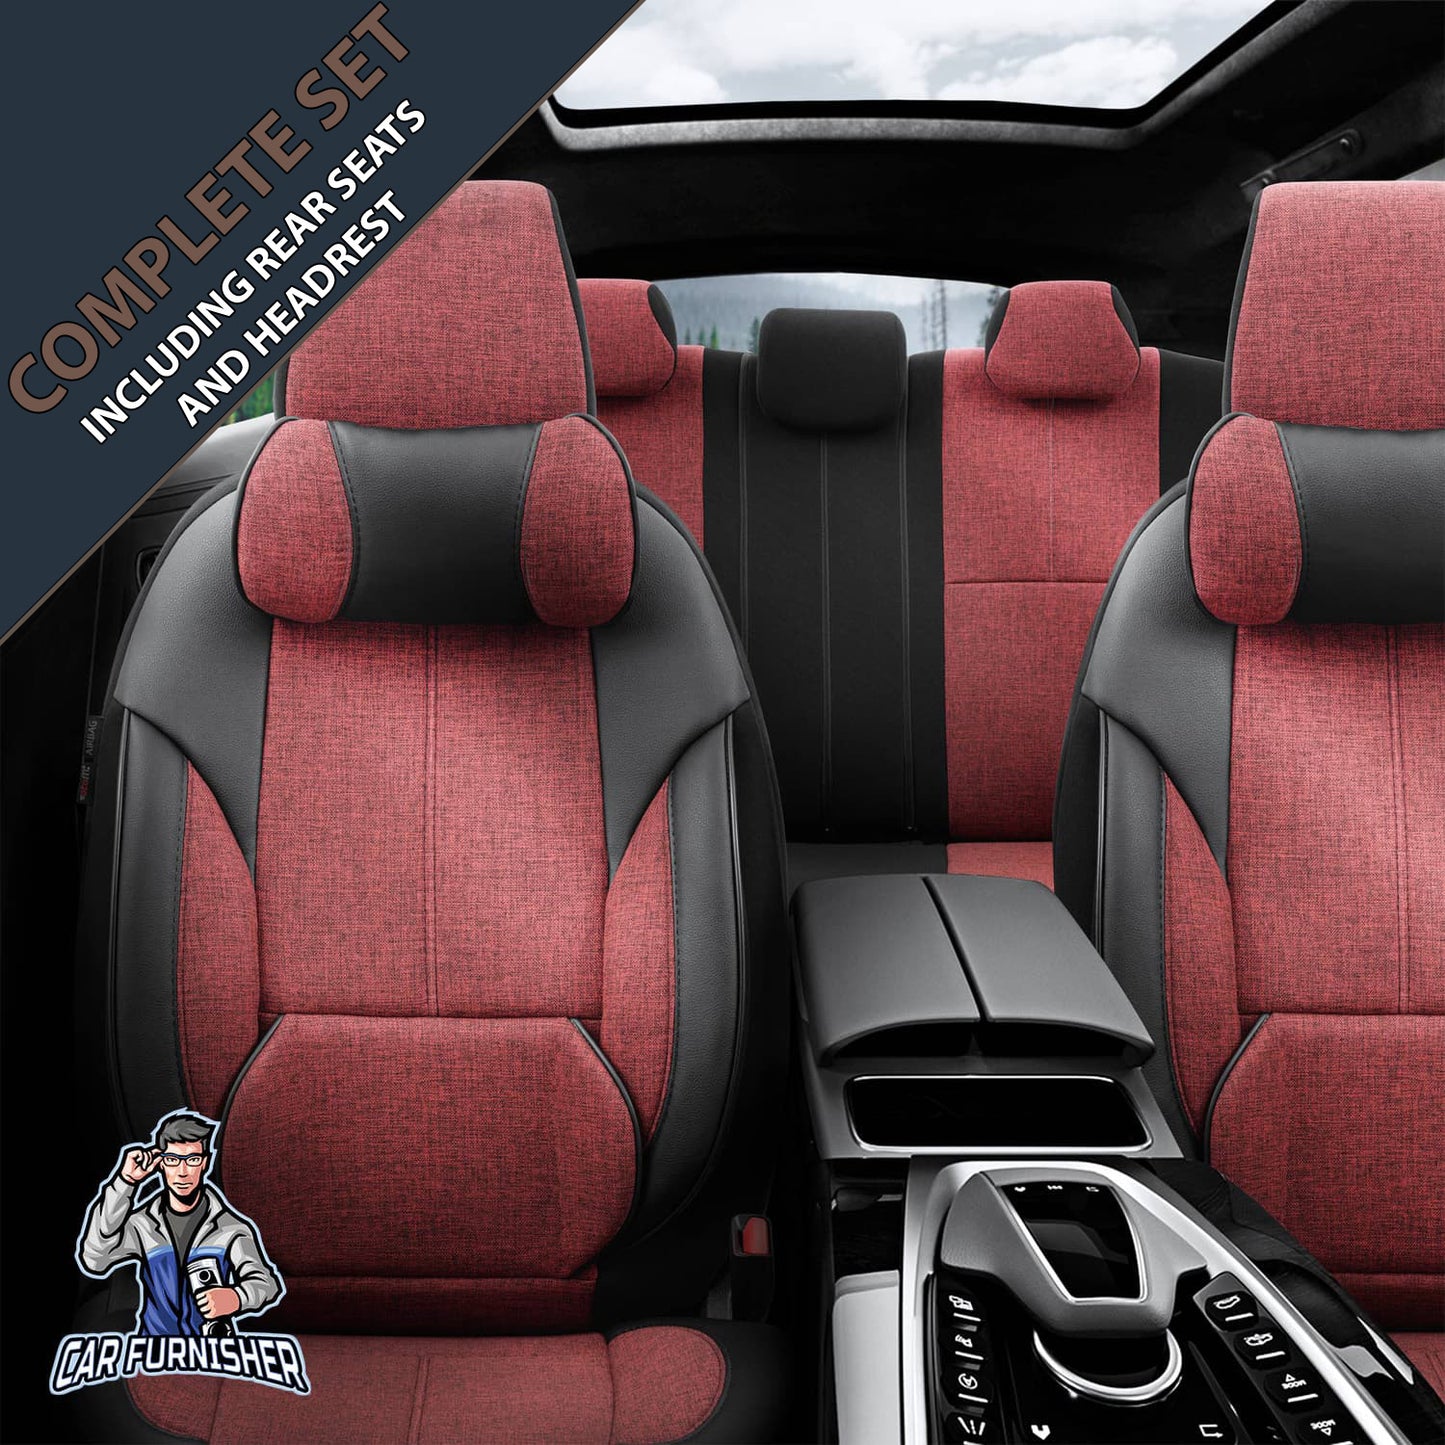 Car Seat Cover Set - Voyager Design Red 5 Seats + Headrests (Full Set) Leather & Linen Fabric